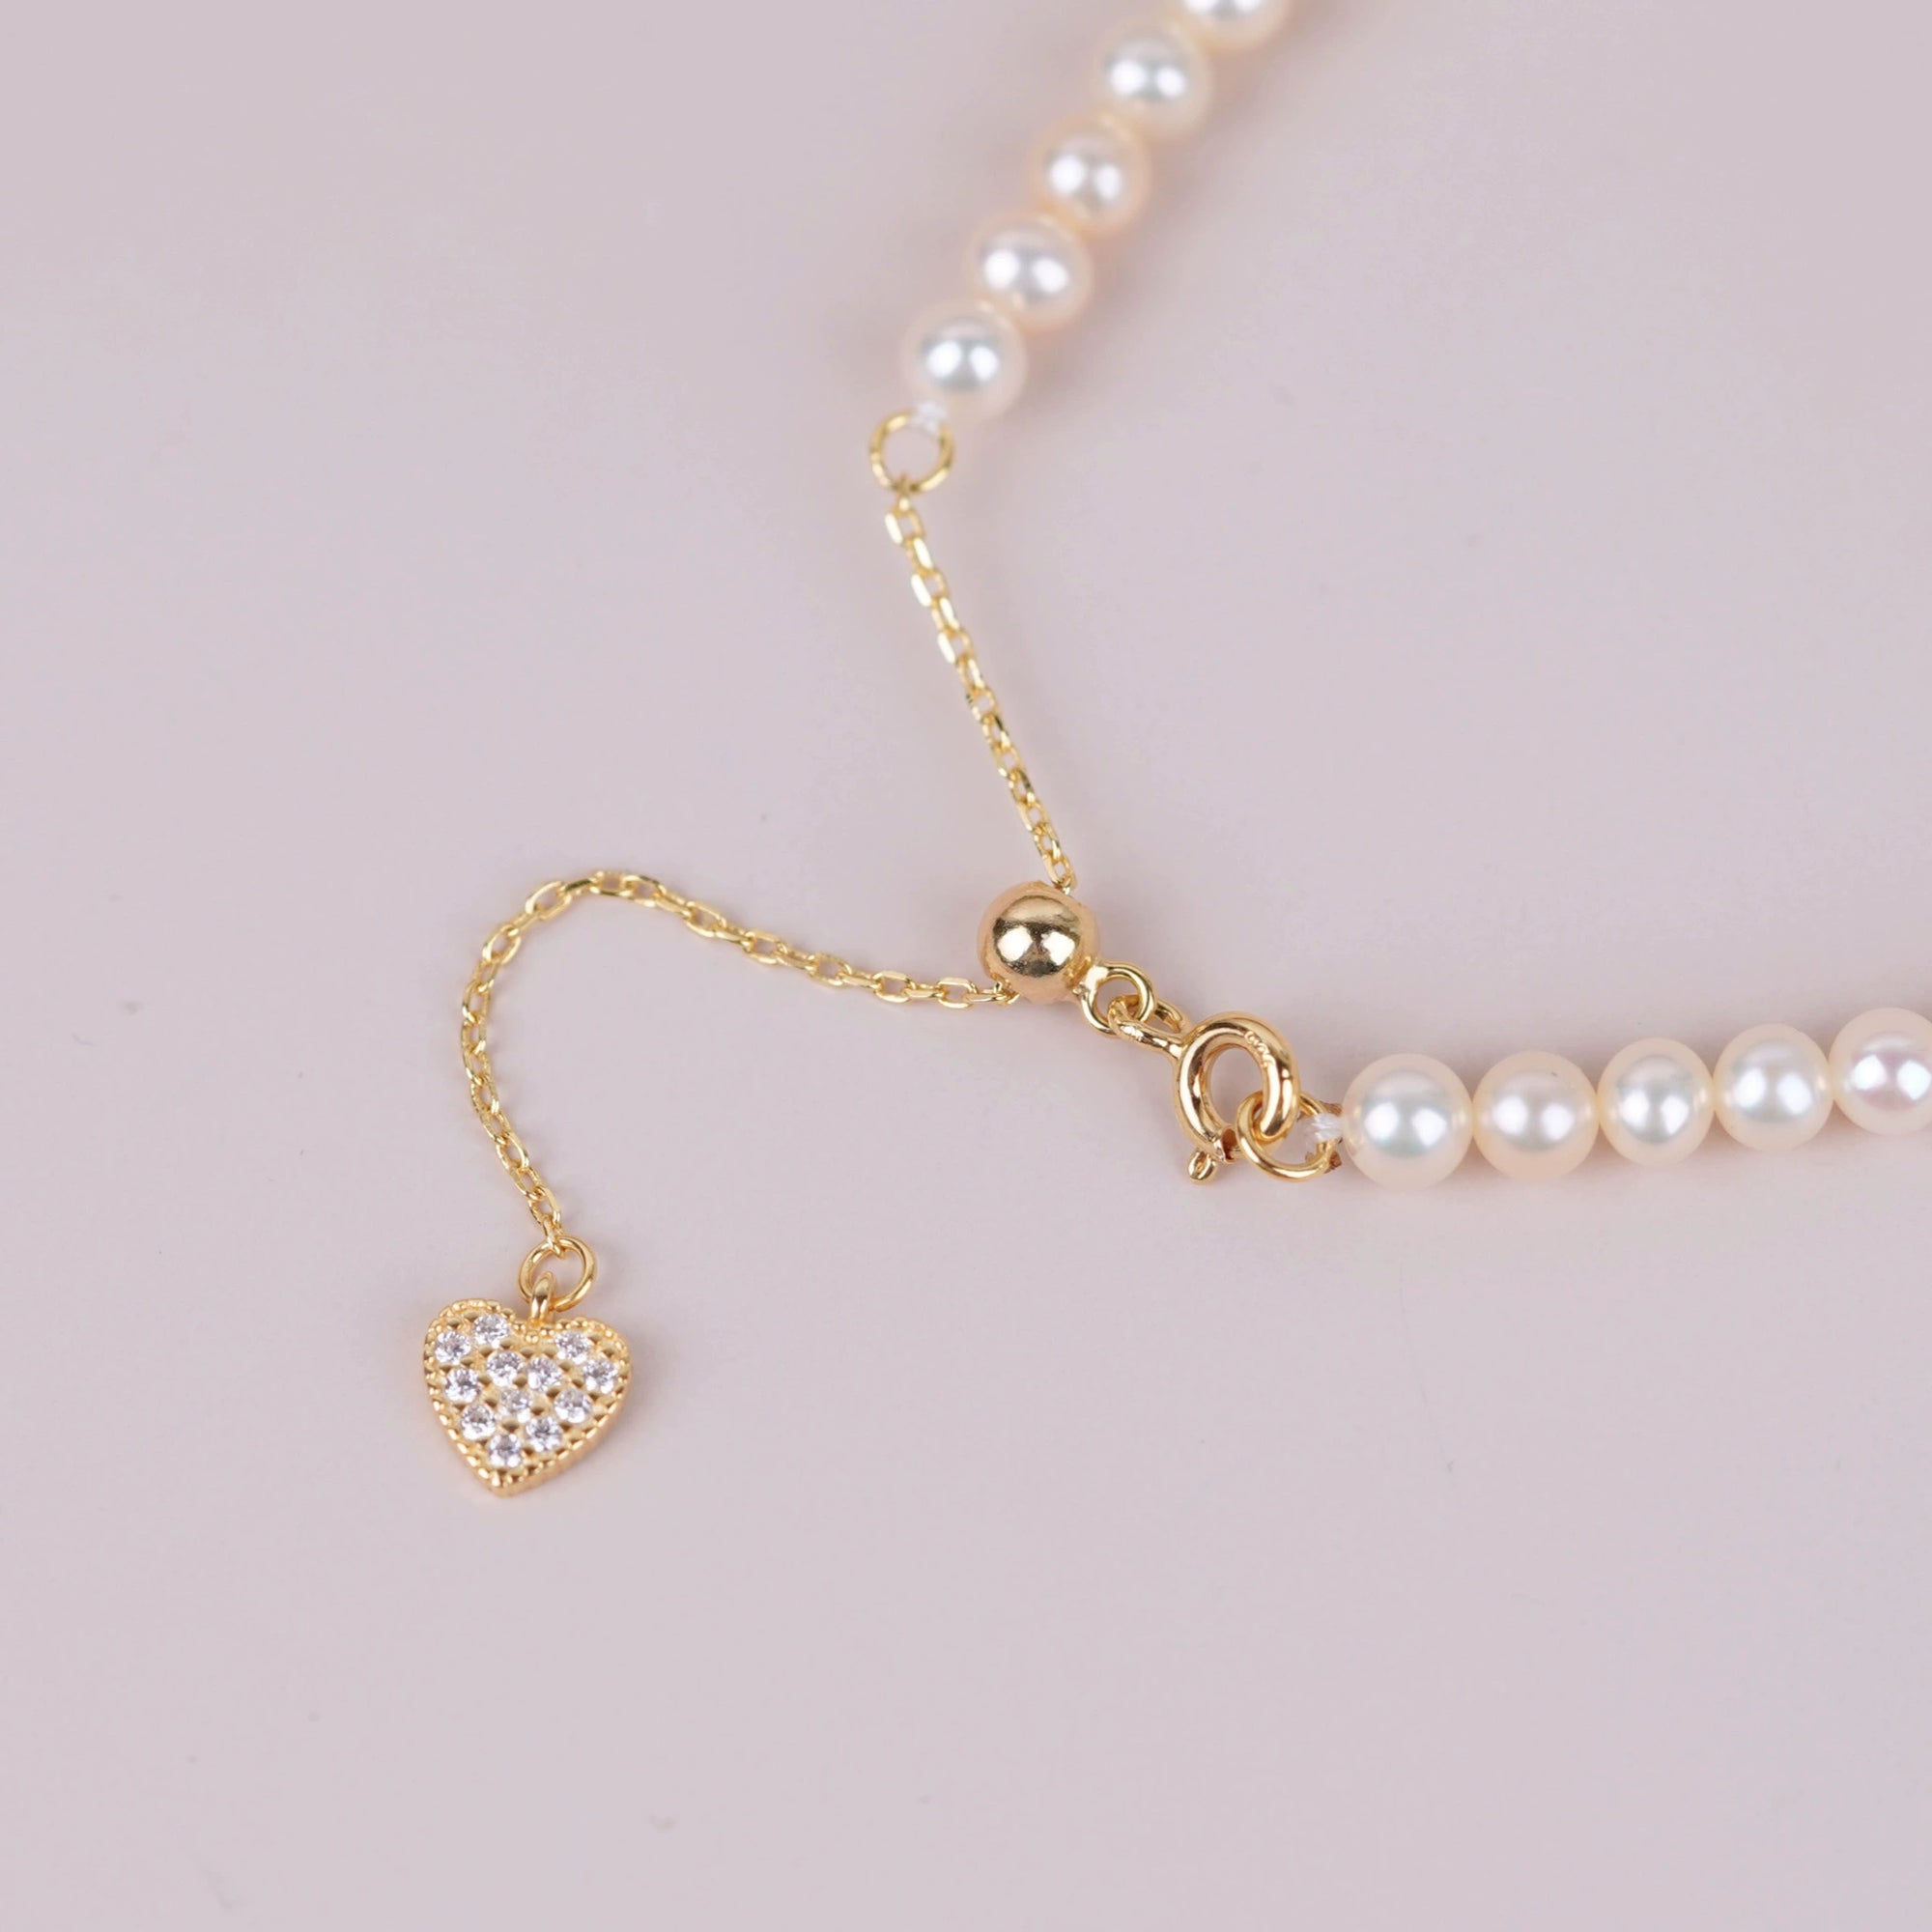 S925 sterling silver adjustable love heart extension chain